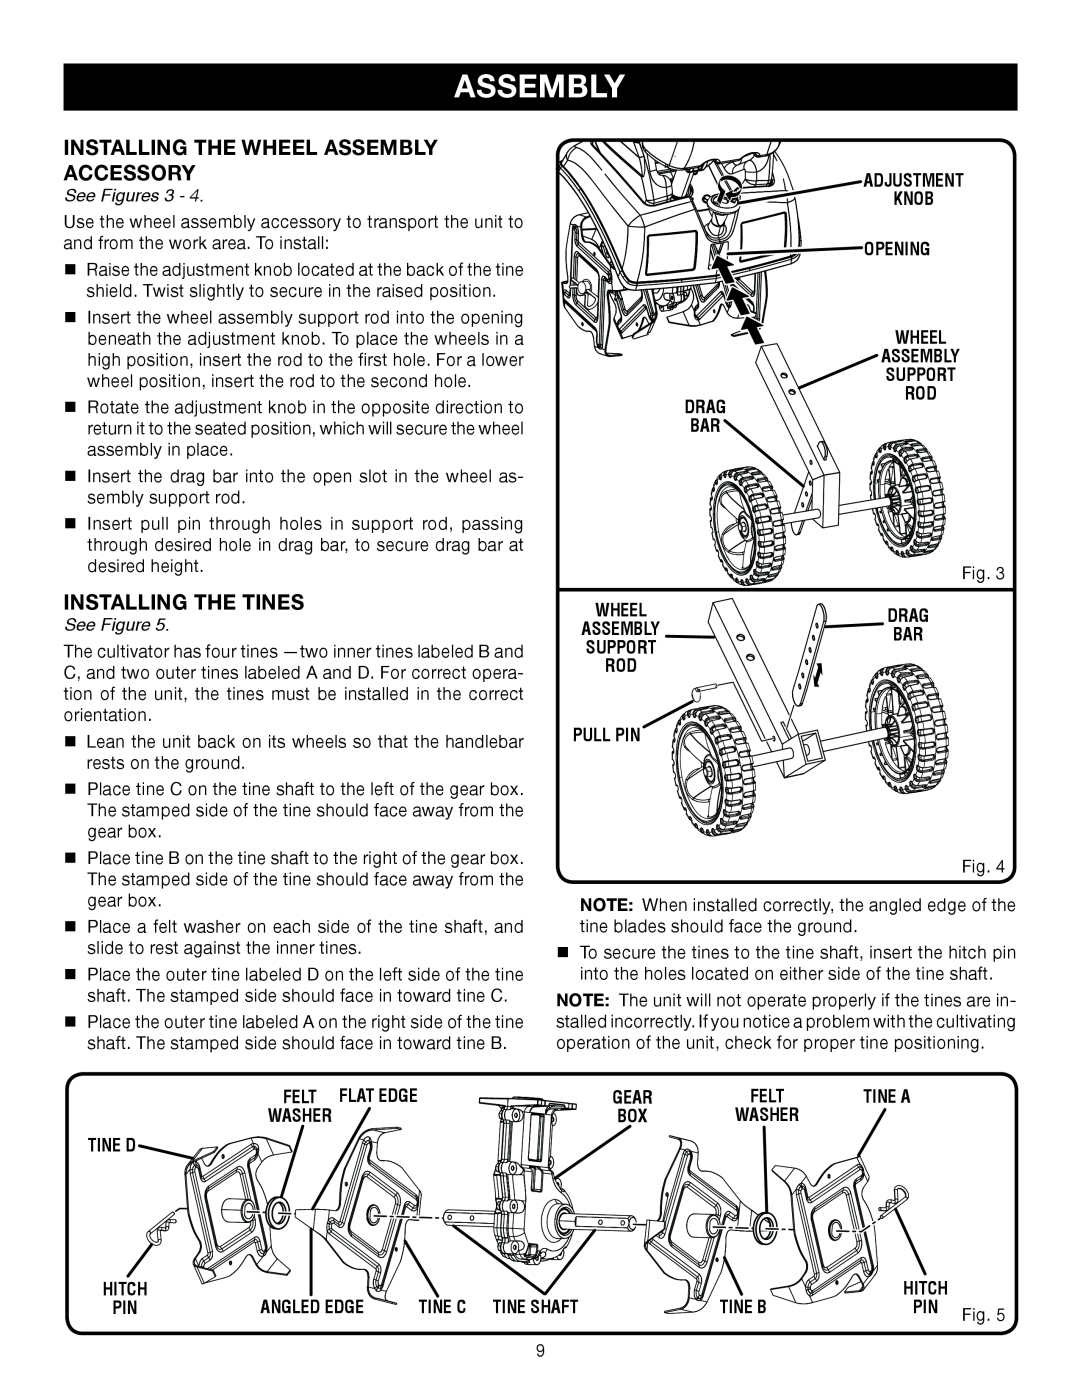 Ryobi Outdoor RY60511A Installing The Wheel Assembly Accessory, Installing The Tines, See Figures, Adjustment, Drag Bar 